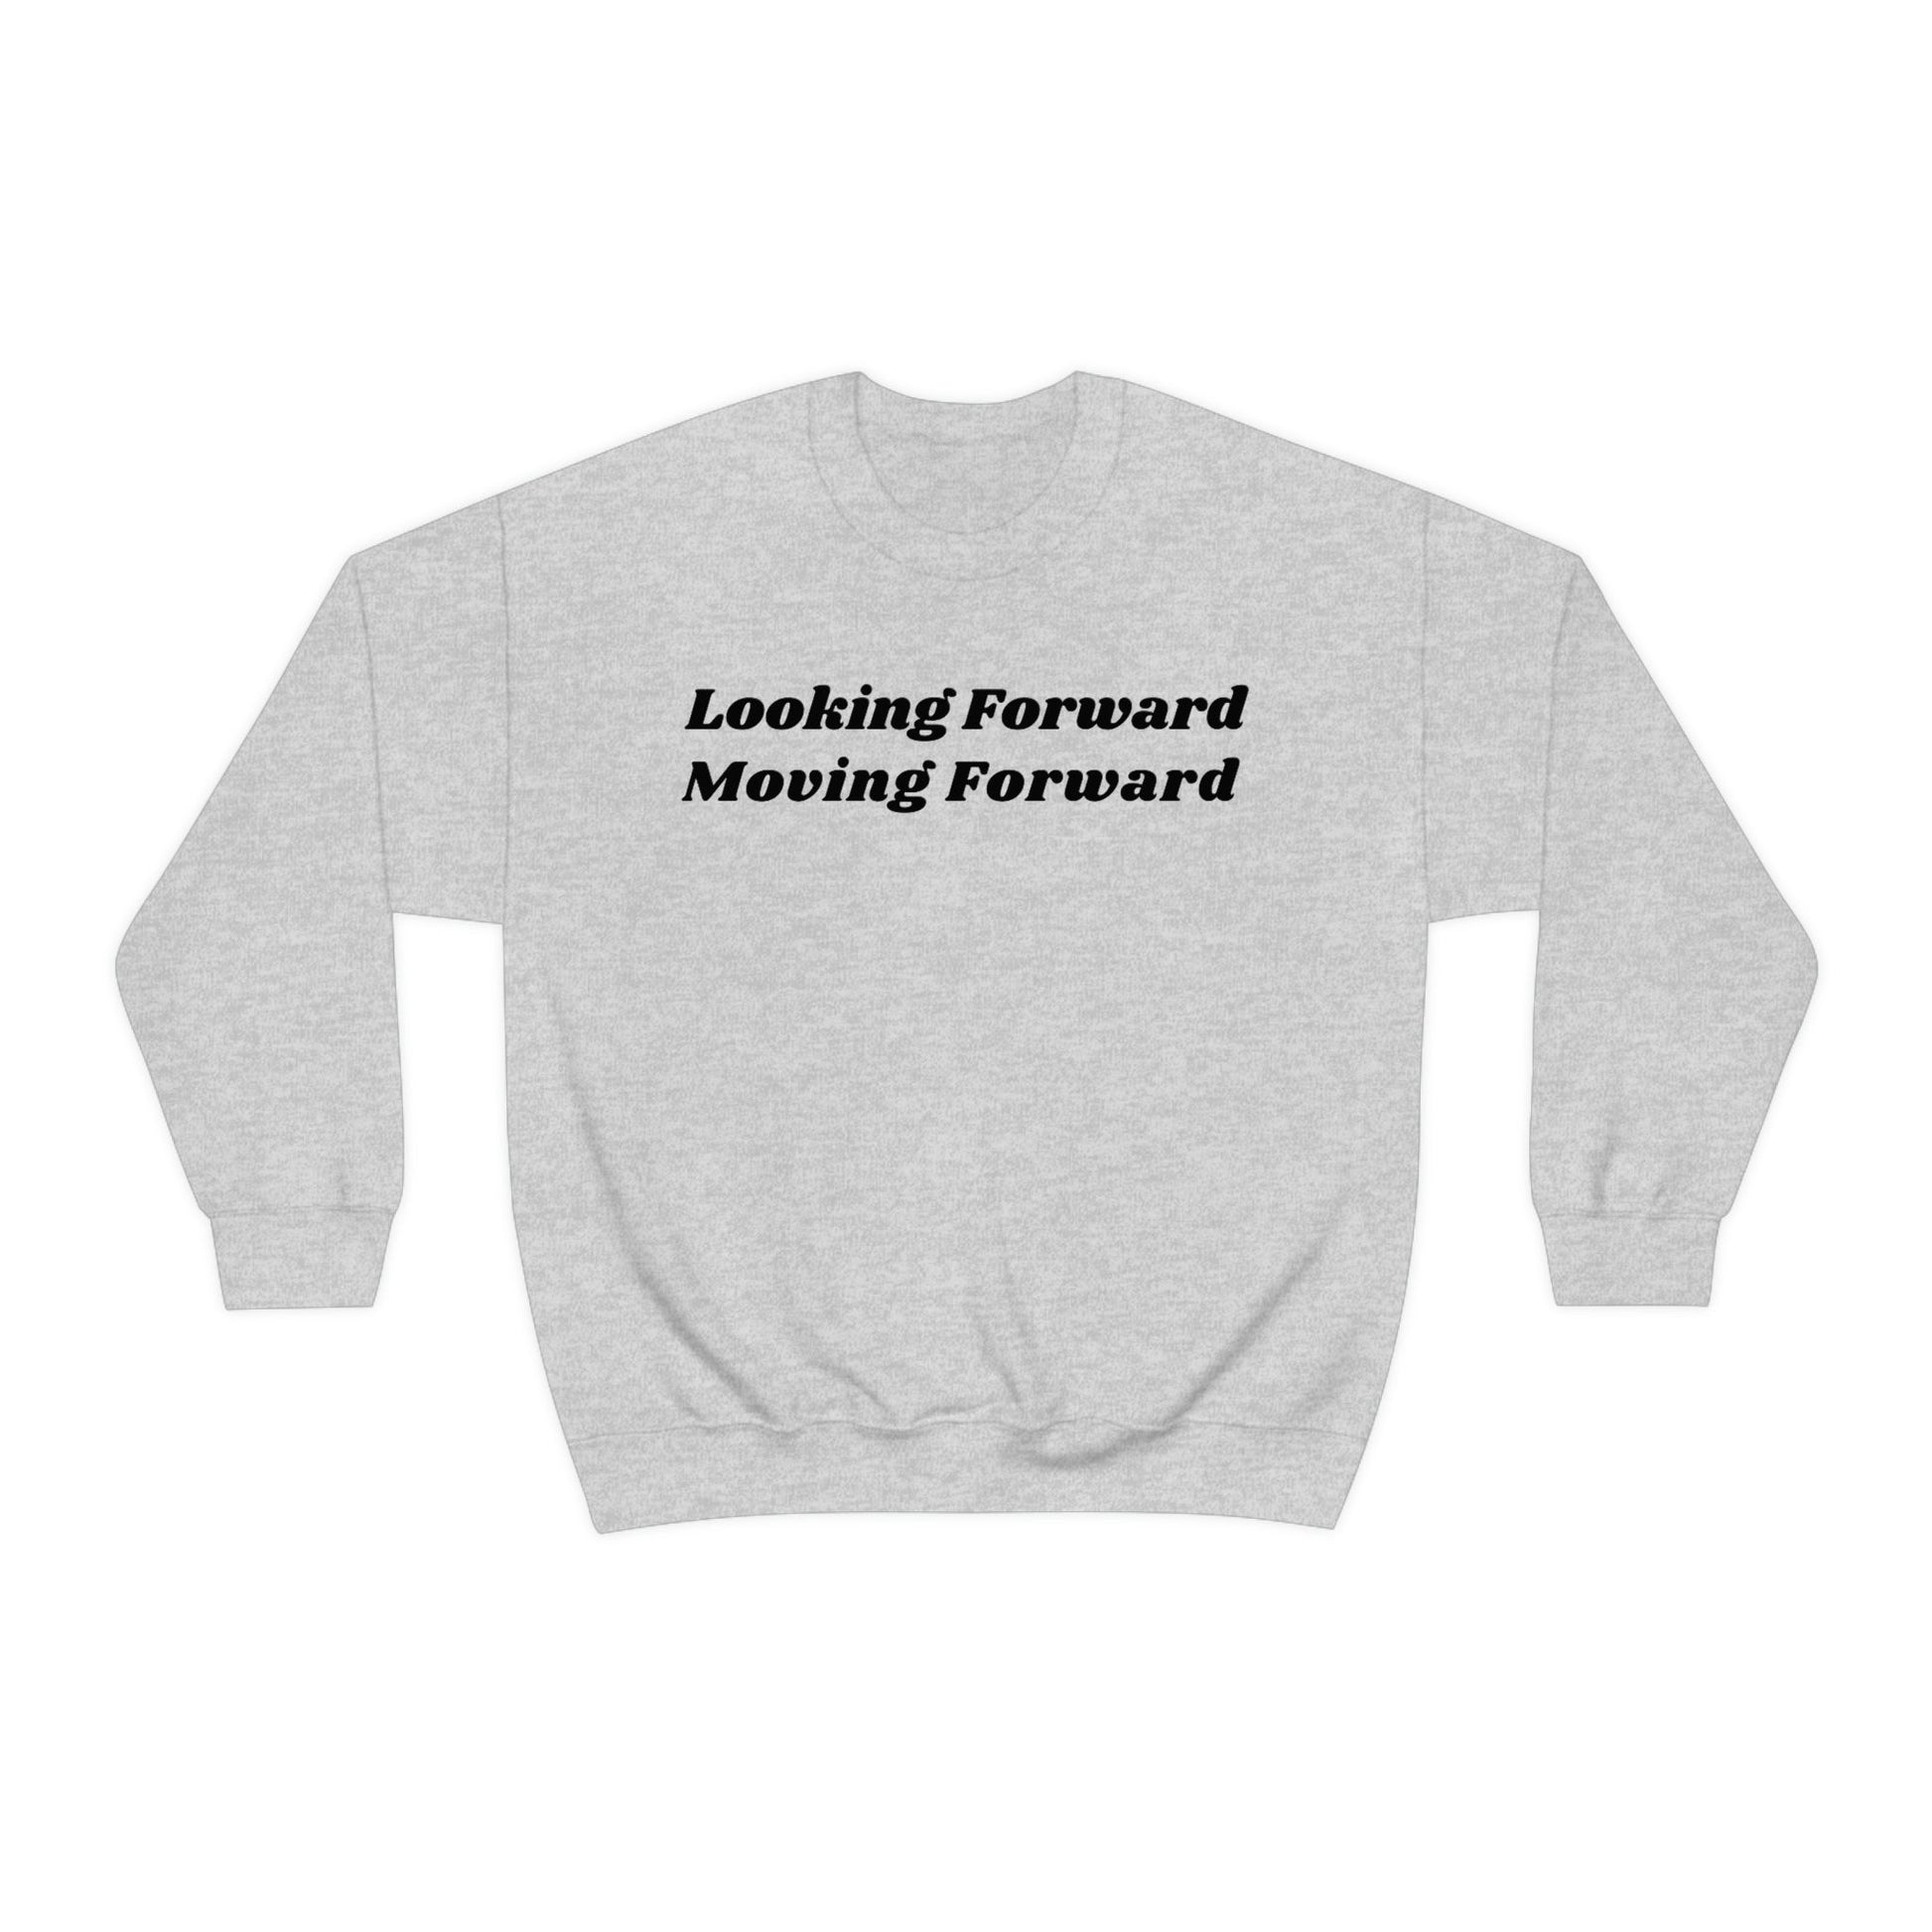 Moving forward from domestic violence, stop domestic violence, moving forward with my life, empowerment, inspirational sweatshirt 